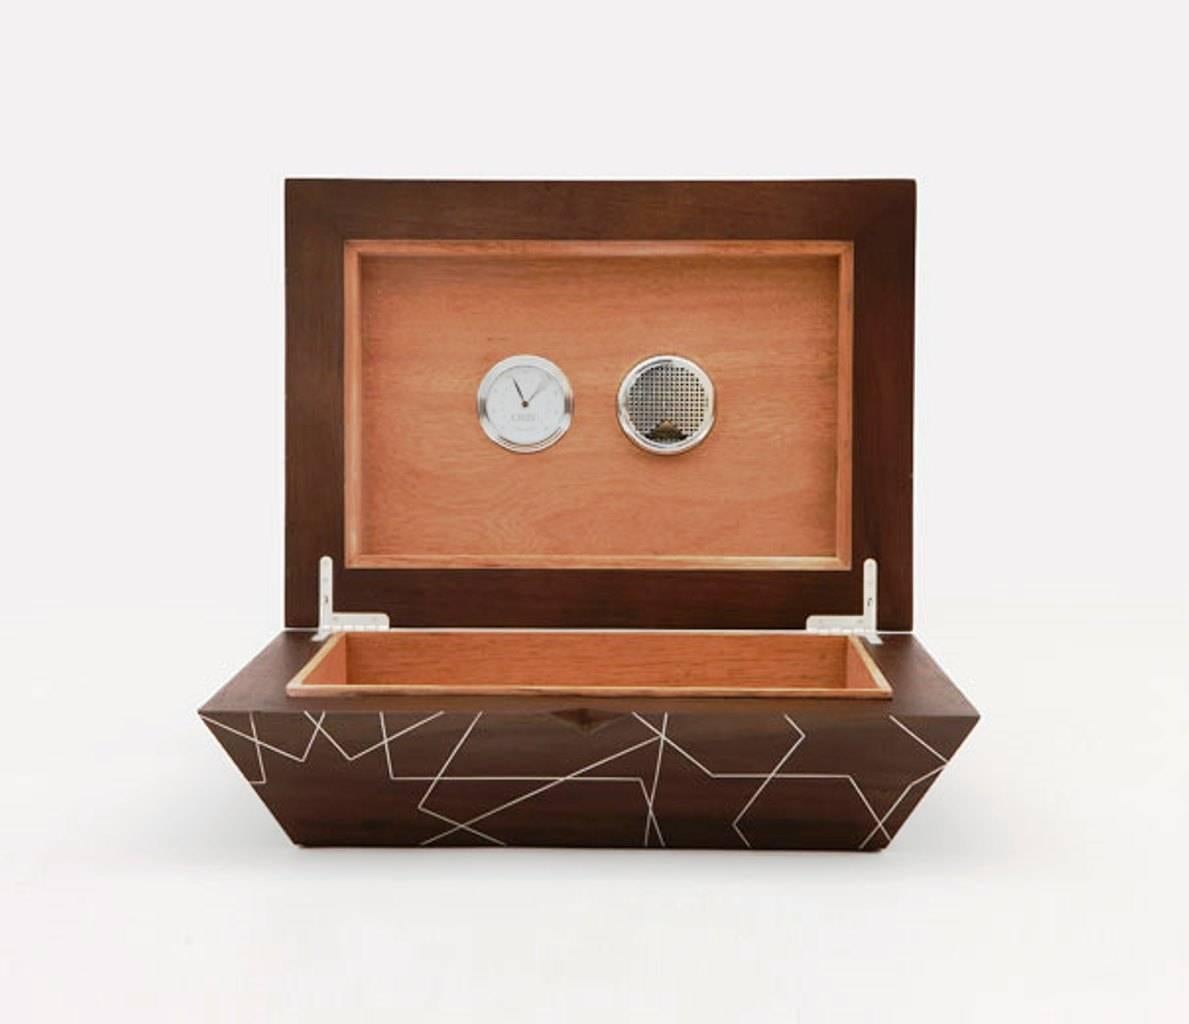 Designed around the classic lifestyle of the cigar smoker, the smoke cigar box by Nada Debs features a solid walnut wood structure with T1 tin inlay pattern, and a humidifier. The hand inlay designs are inspired by the traditional Middle Eastern